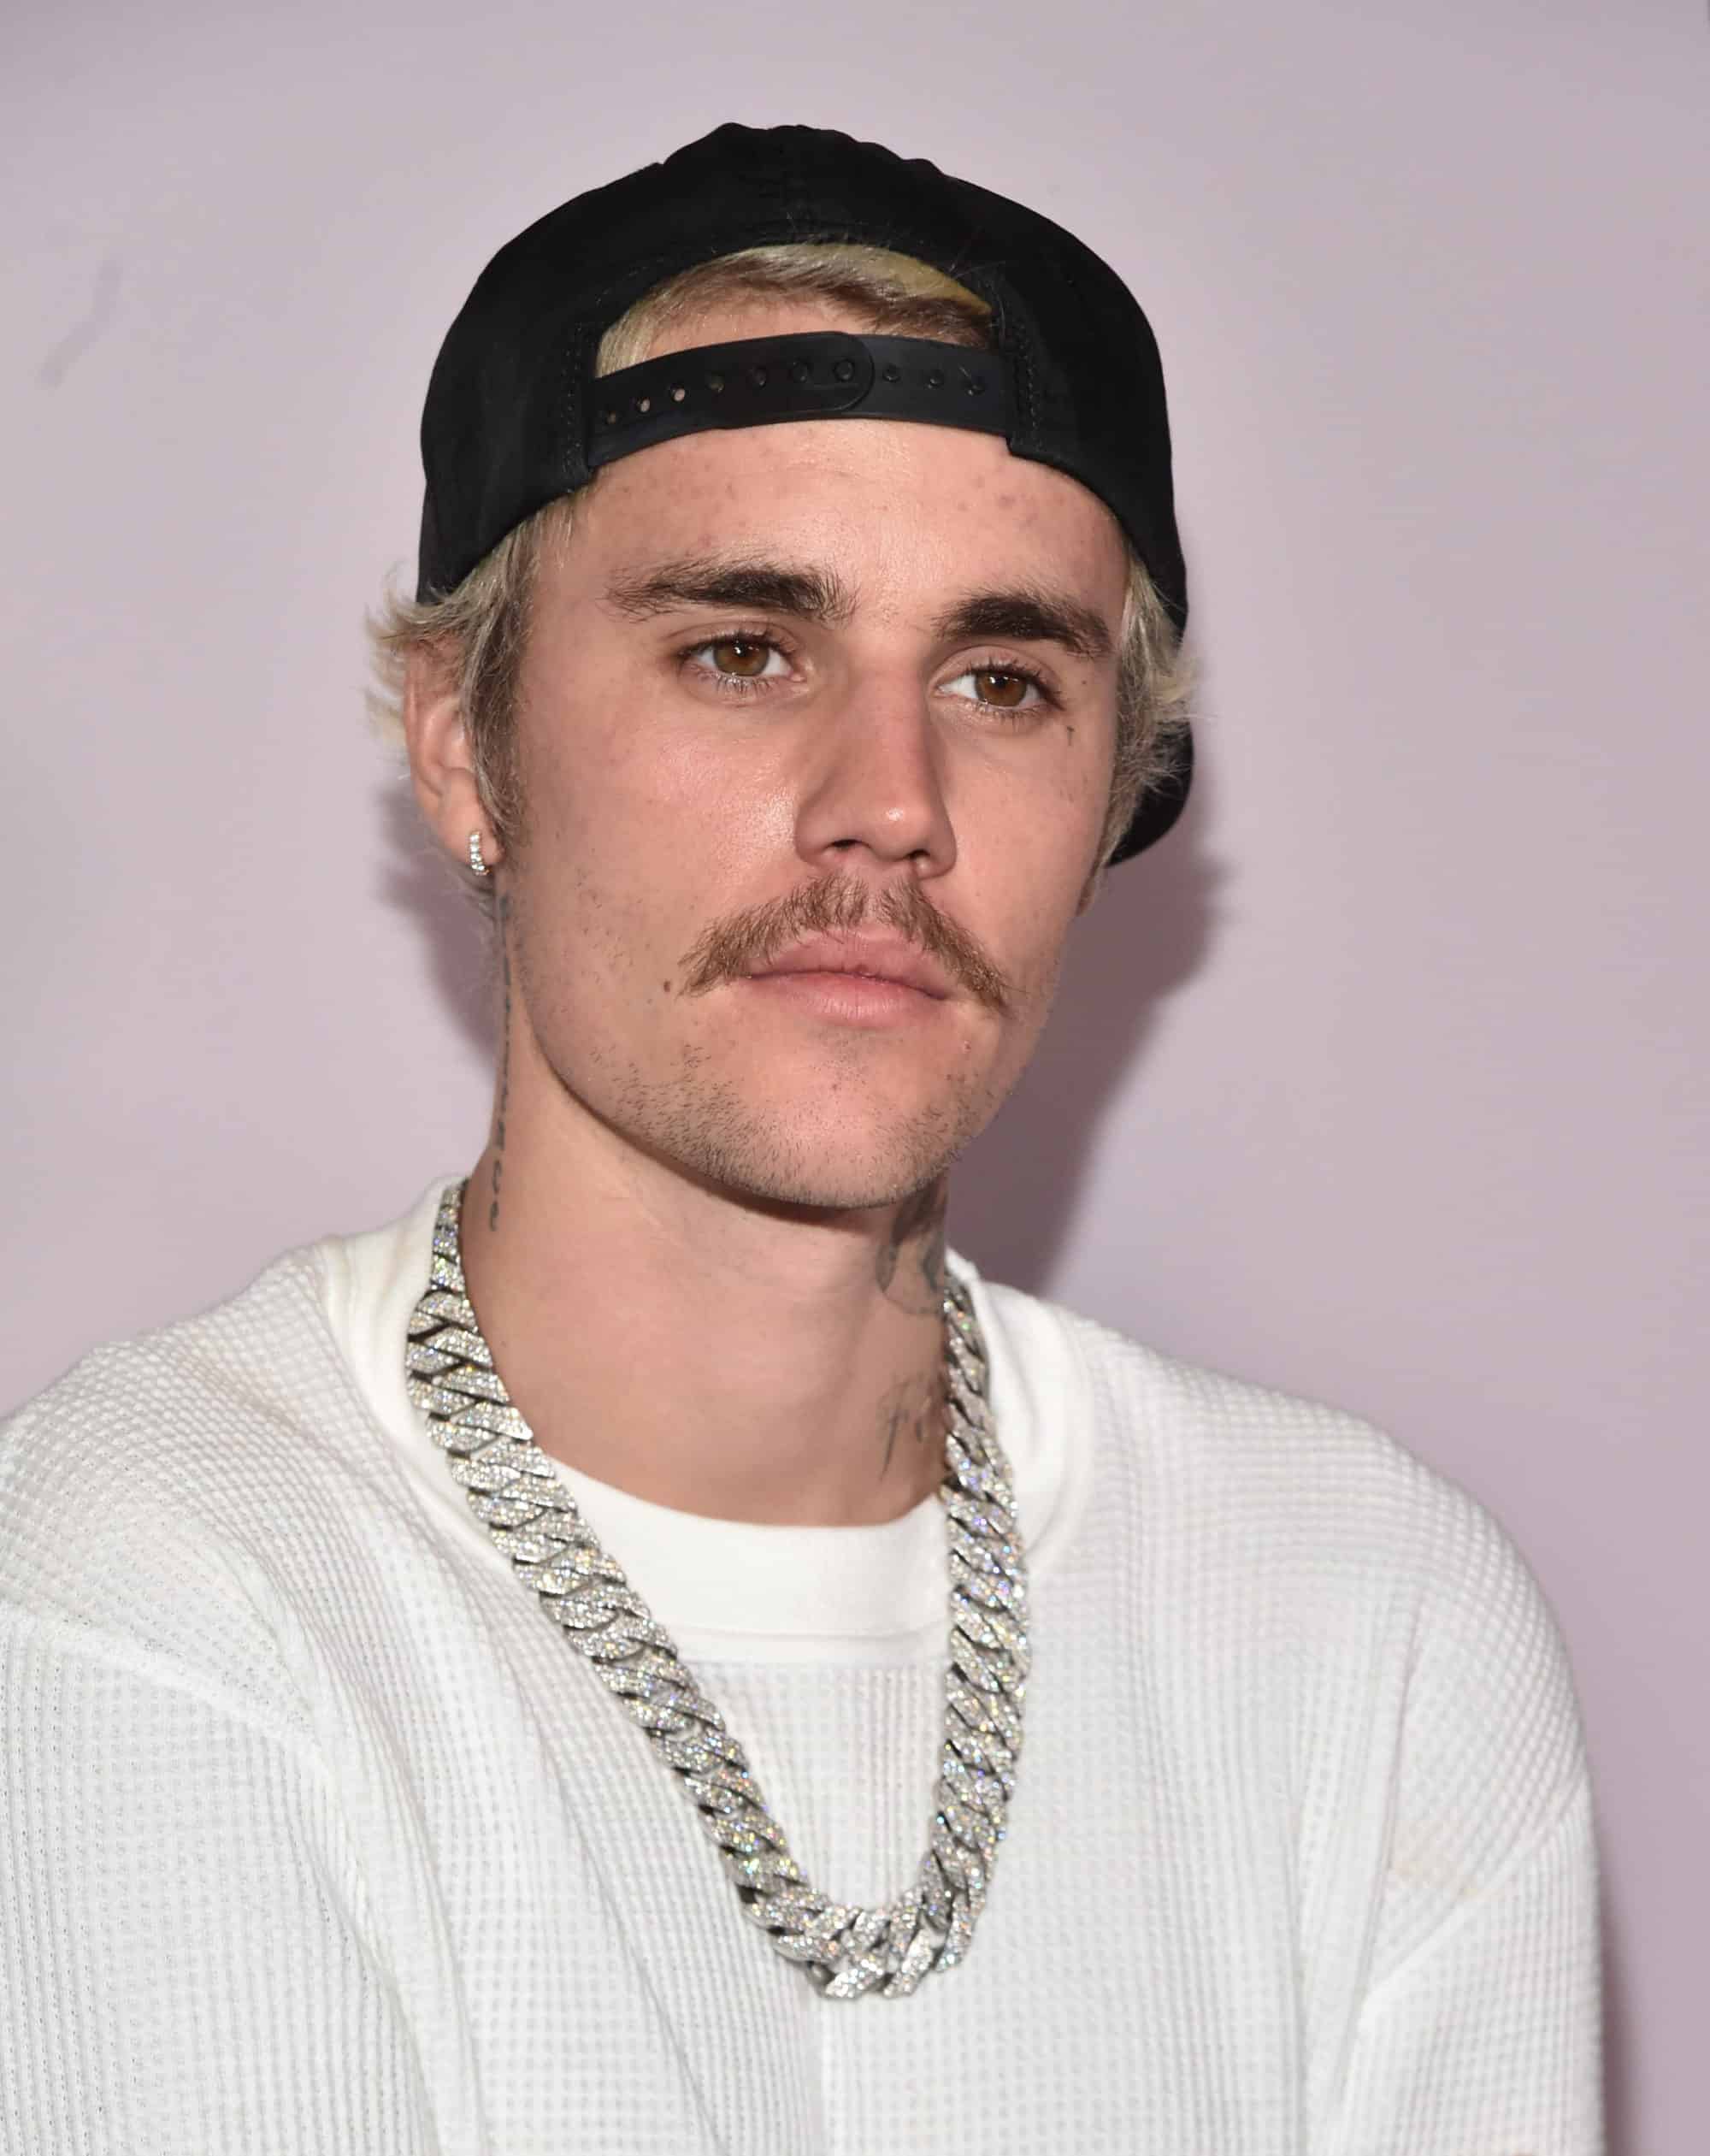 Justin Bieber is reportedly studying to become a full-fledged minister at his Hillsong Church. He has been a devoted member of the church for a few years.